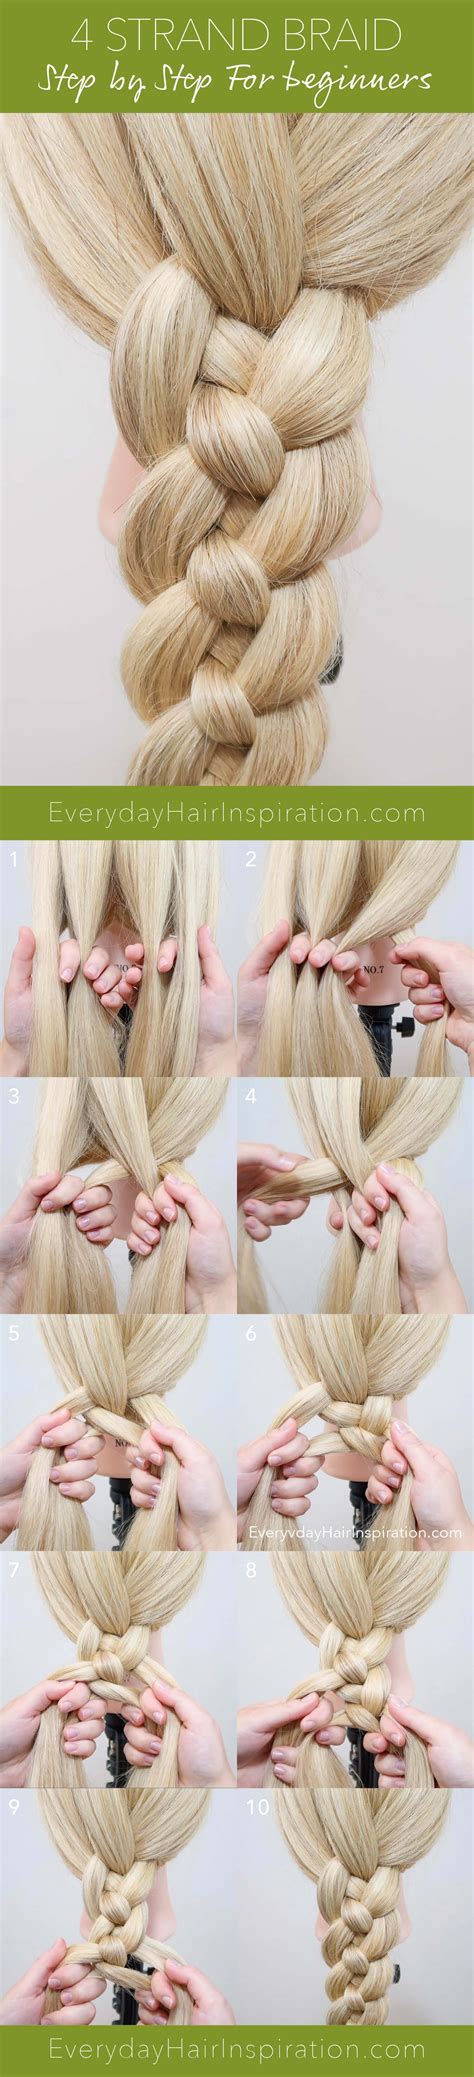 The outer right strands are woven over and under the strands next to them, going from right to left. How To 4 Strand Braid - Everyday Hair inspiration - BRAIDED STYLES